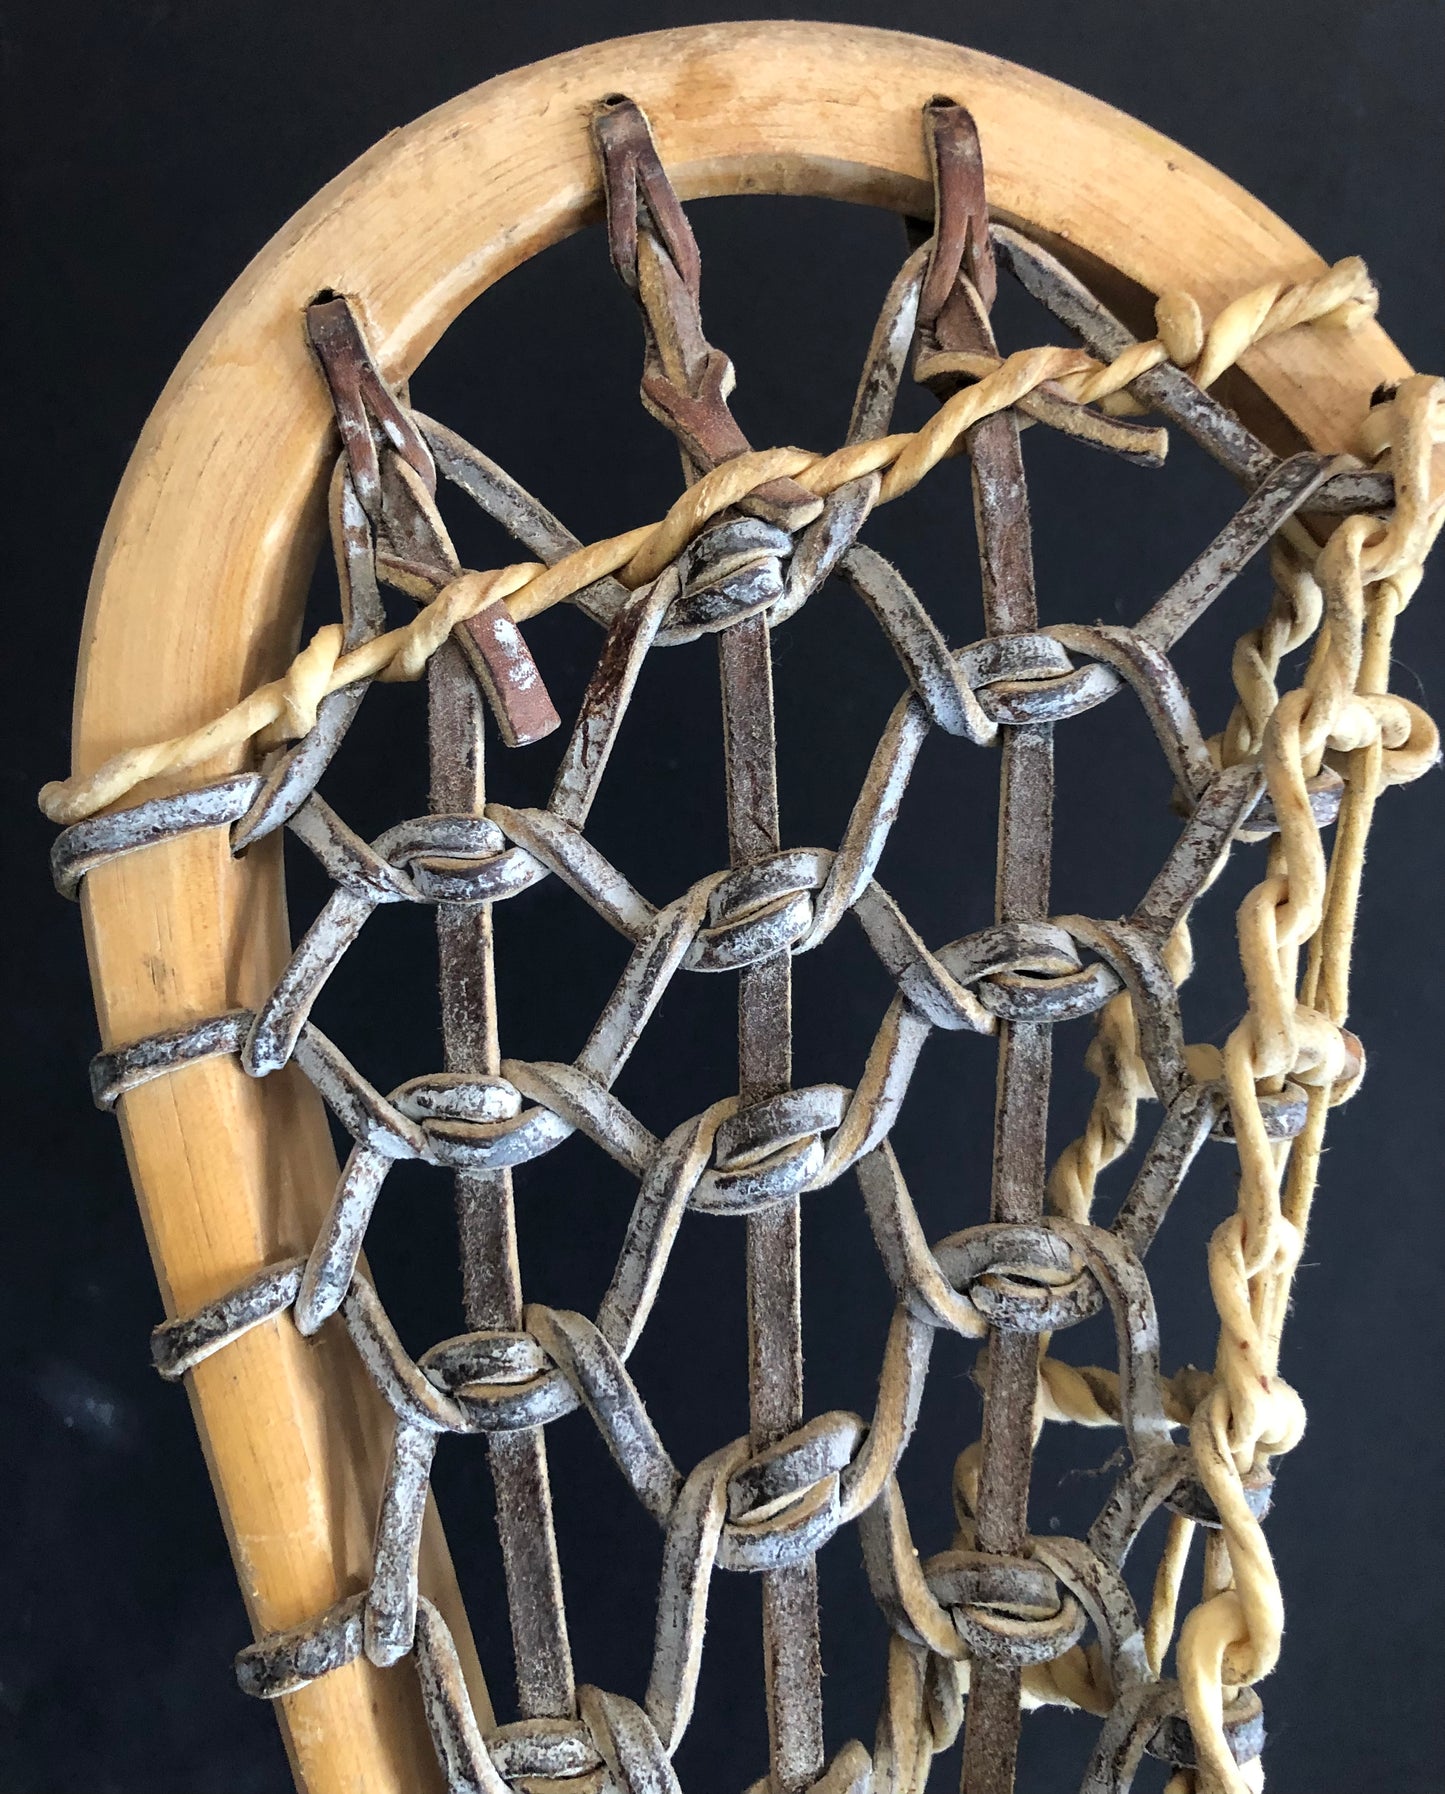 LAX sticks - The Mohawk Lacrosse Stick Manufacturing Company Limited